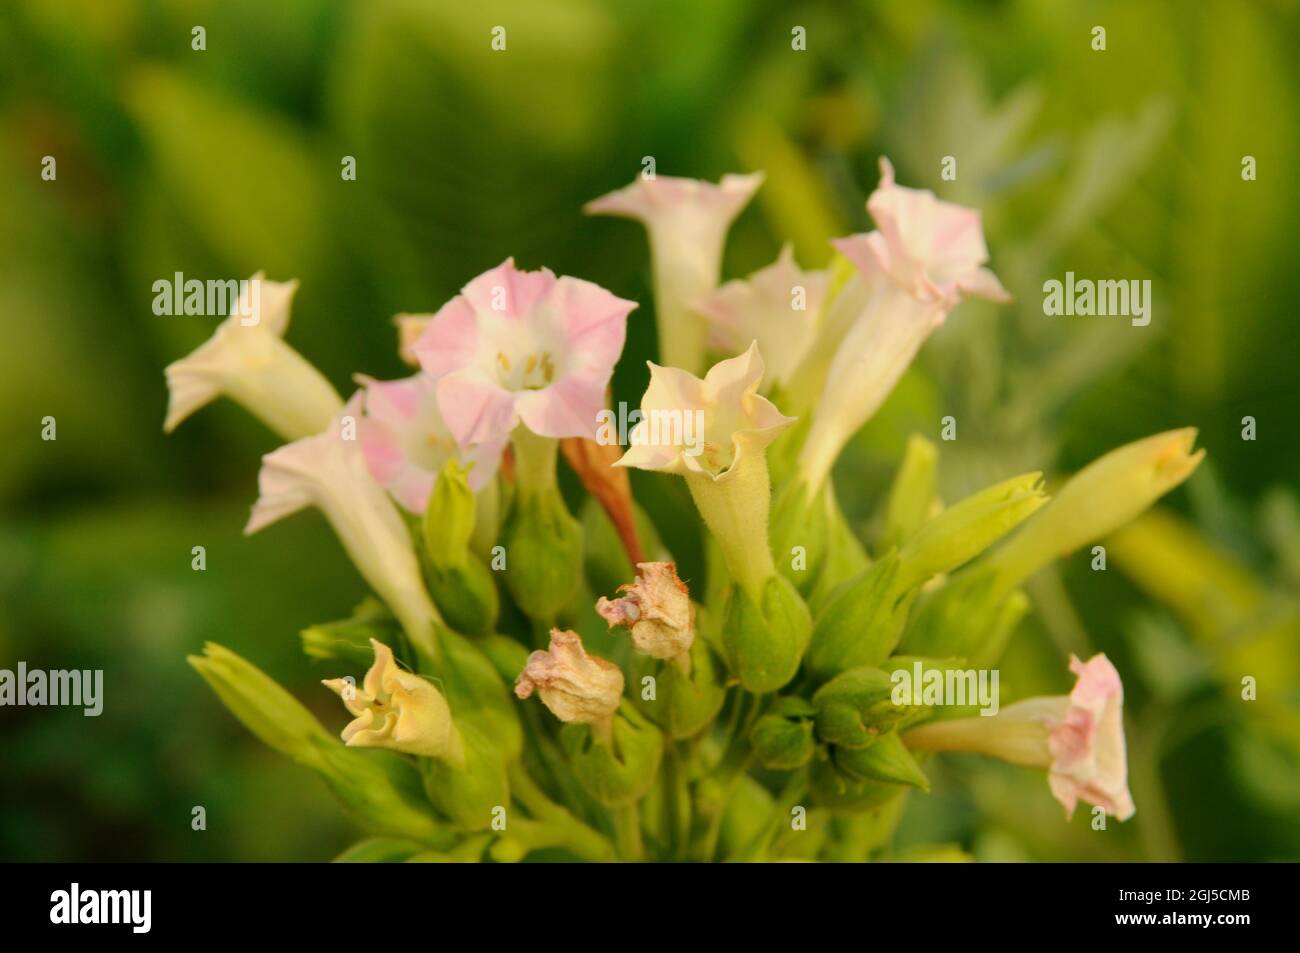 Flowering tobacco plant on tobacco field background. Stock Photo